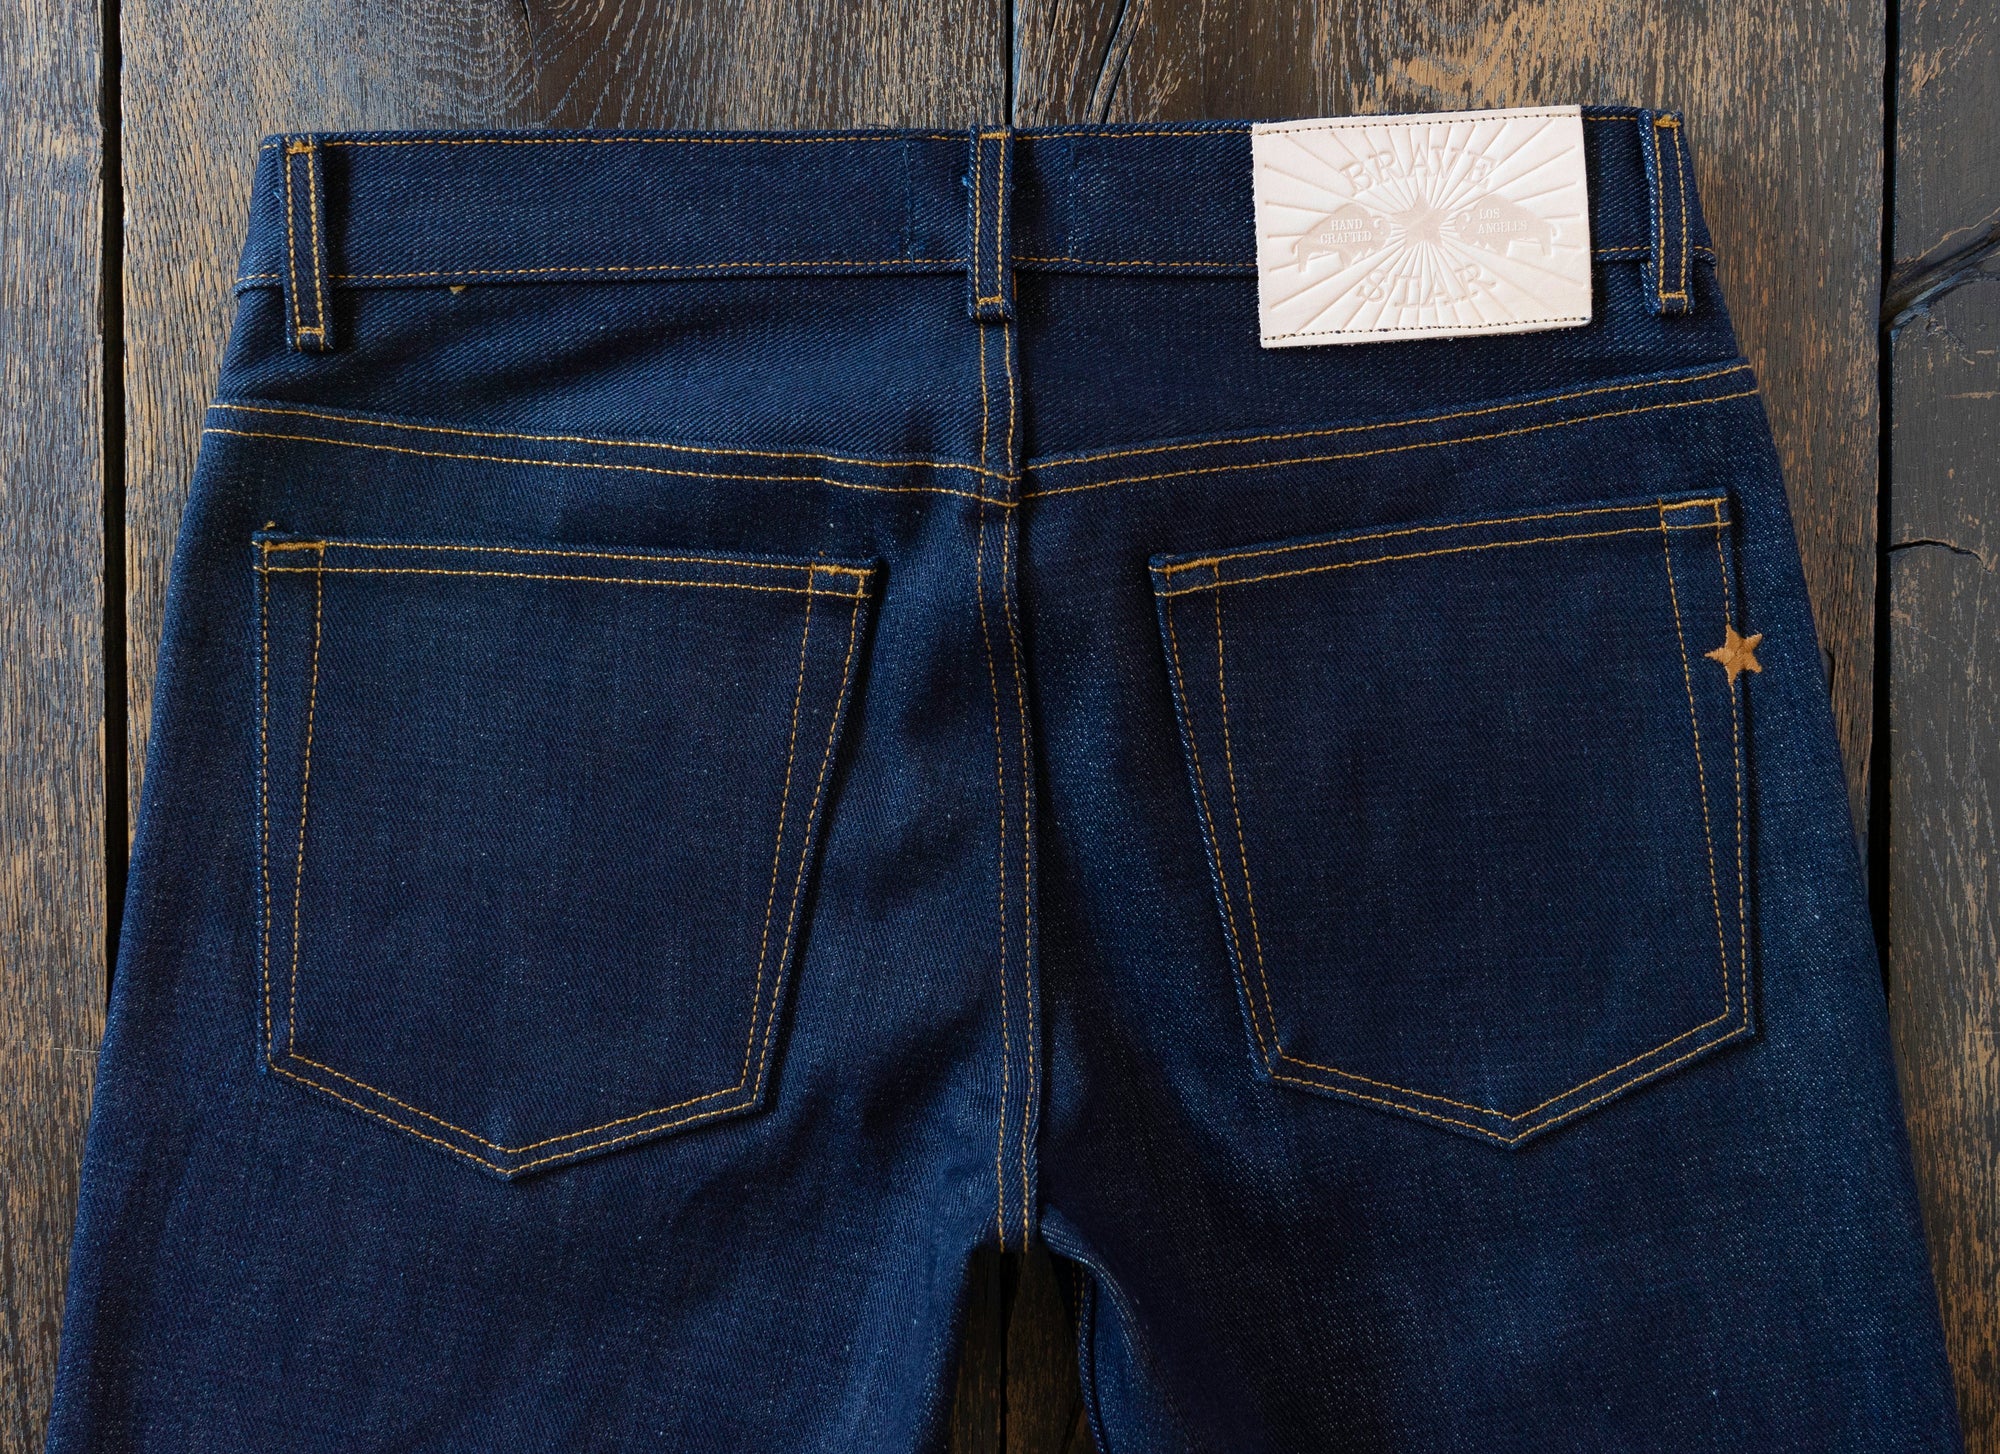 21.5 OZ JEANS - My Brave Star Selvage Review (100 Wears